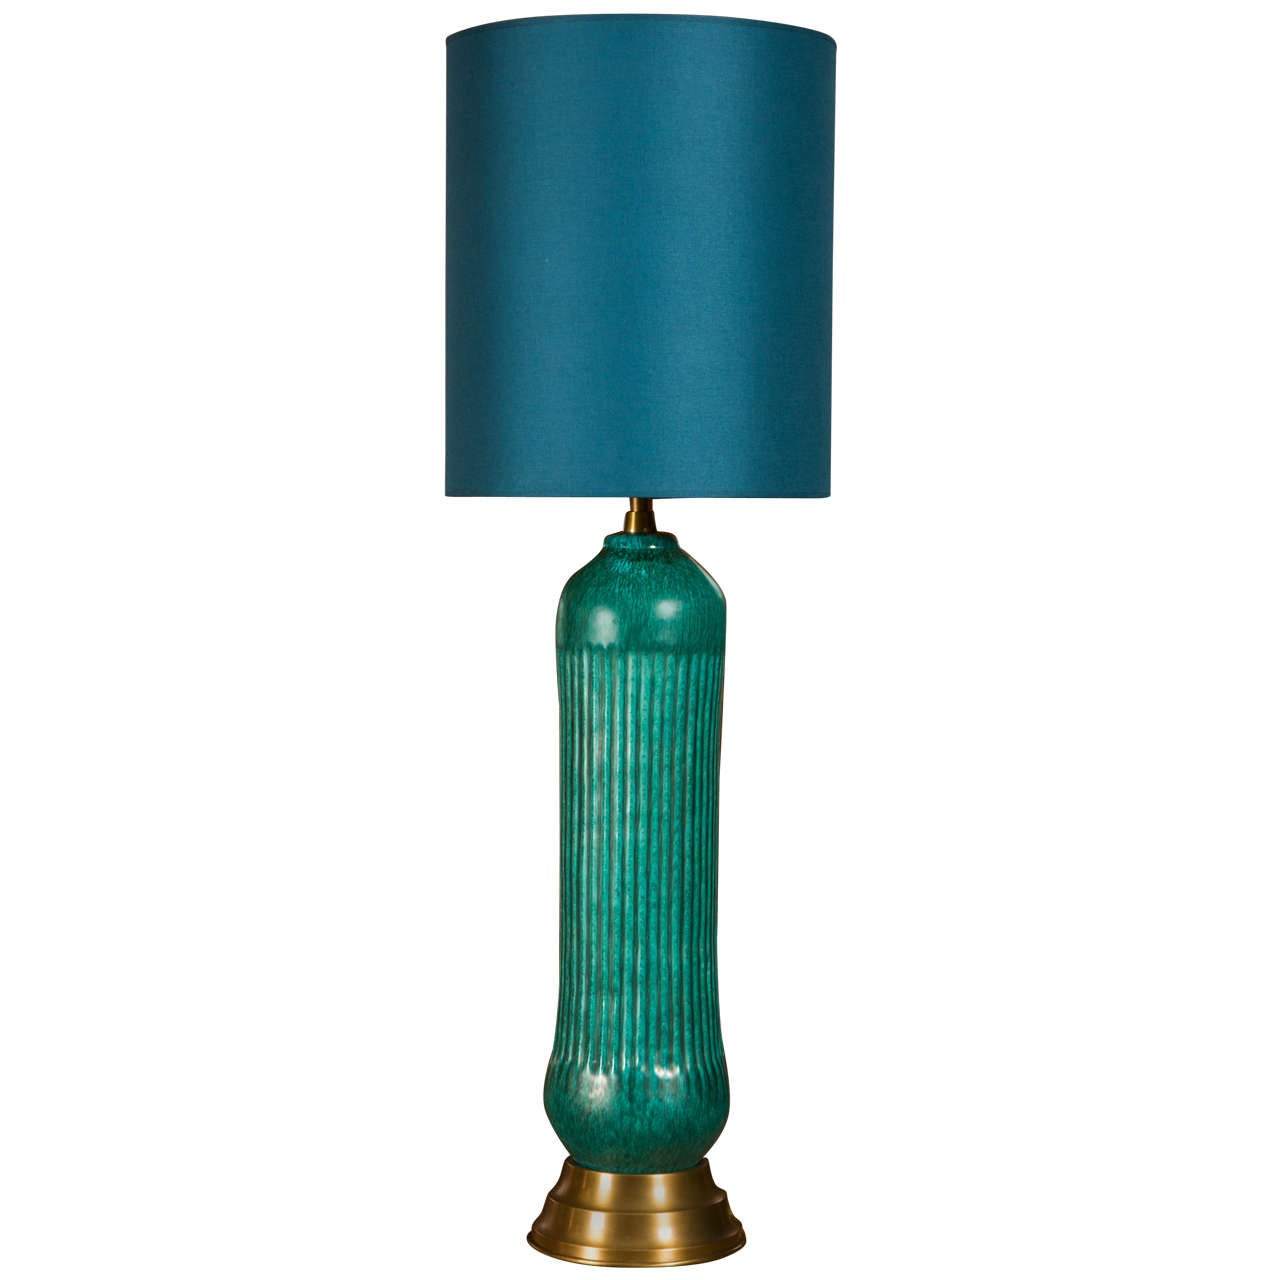 Tall Table Lamp in Turquoise Glazed Ceramic by Marcello Fantoni, Italy 1950 For Sale